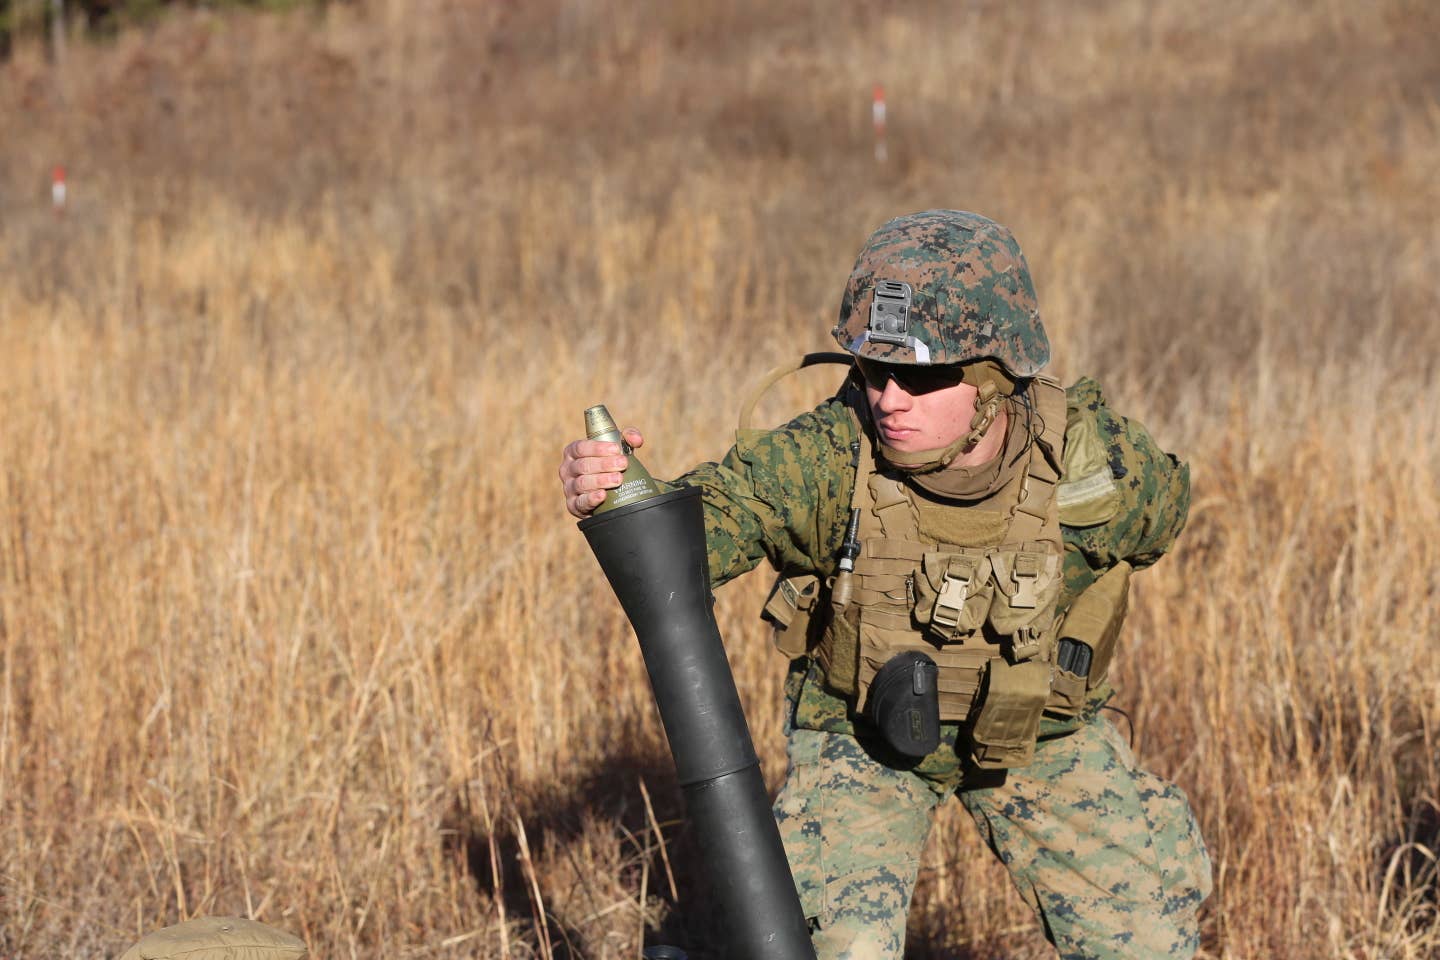 Lance Cpl. Joshua D. Fenton loads a round into an 81 mm Mortar during a deployment for training exercise at Fort. Pickett, Va., Dec. 11, 2016. (U.S. Marine Corps photo by Cpl. Shannon Kroening)